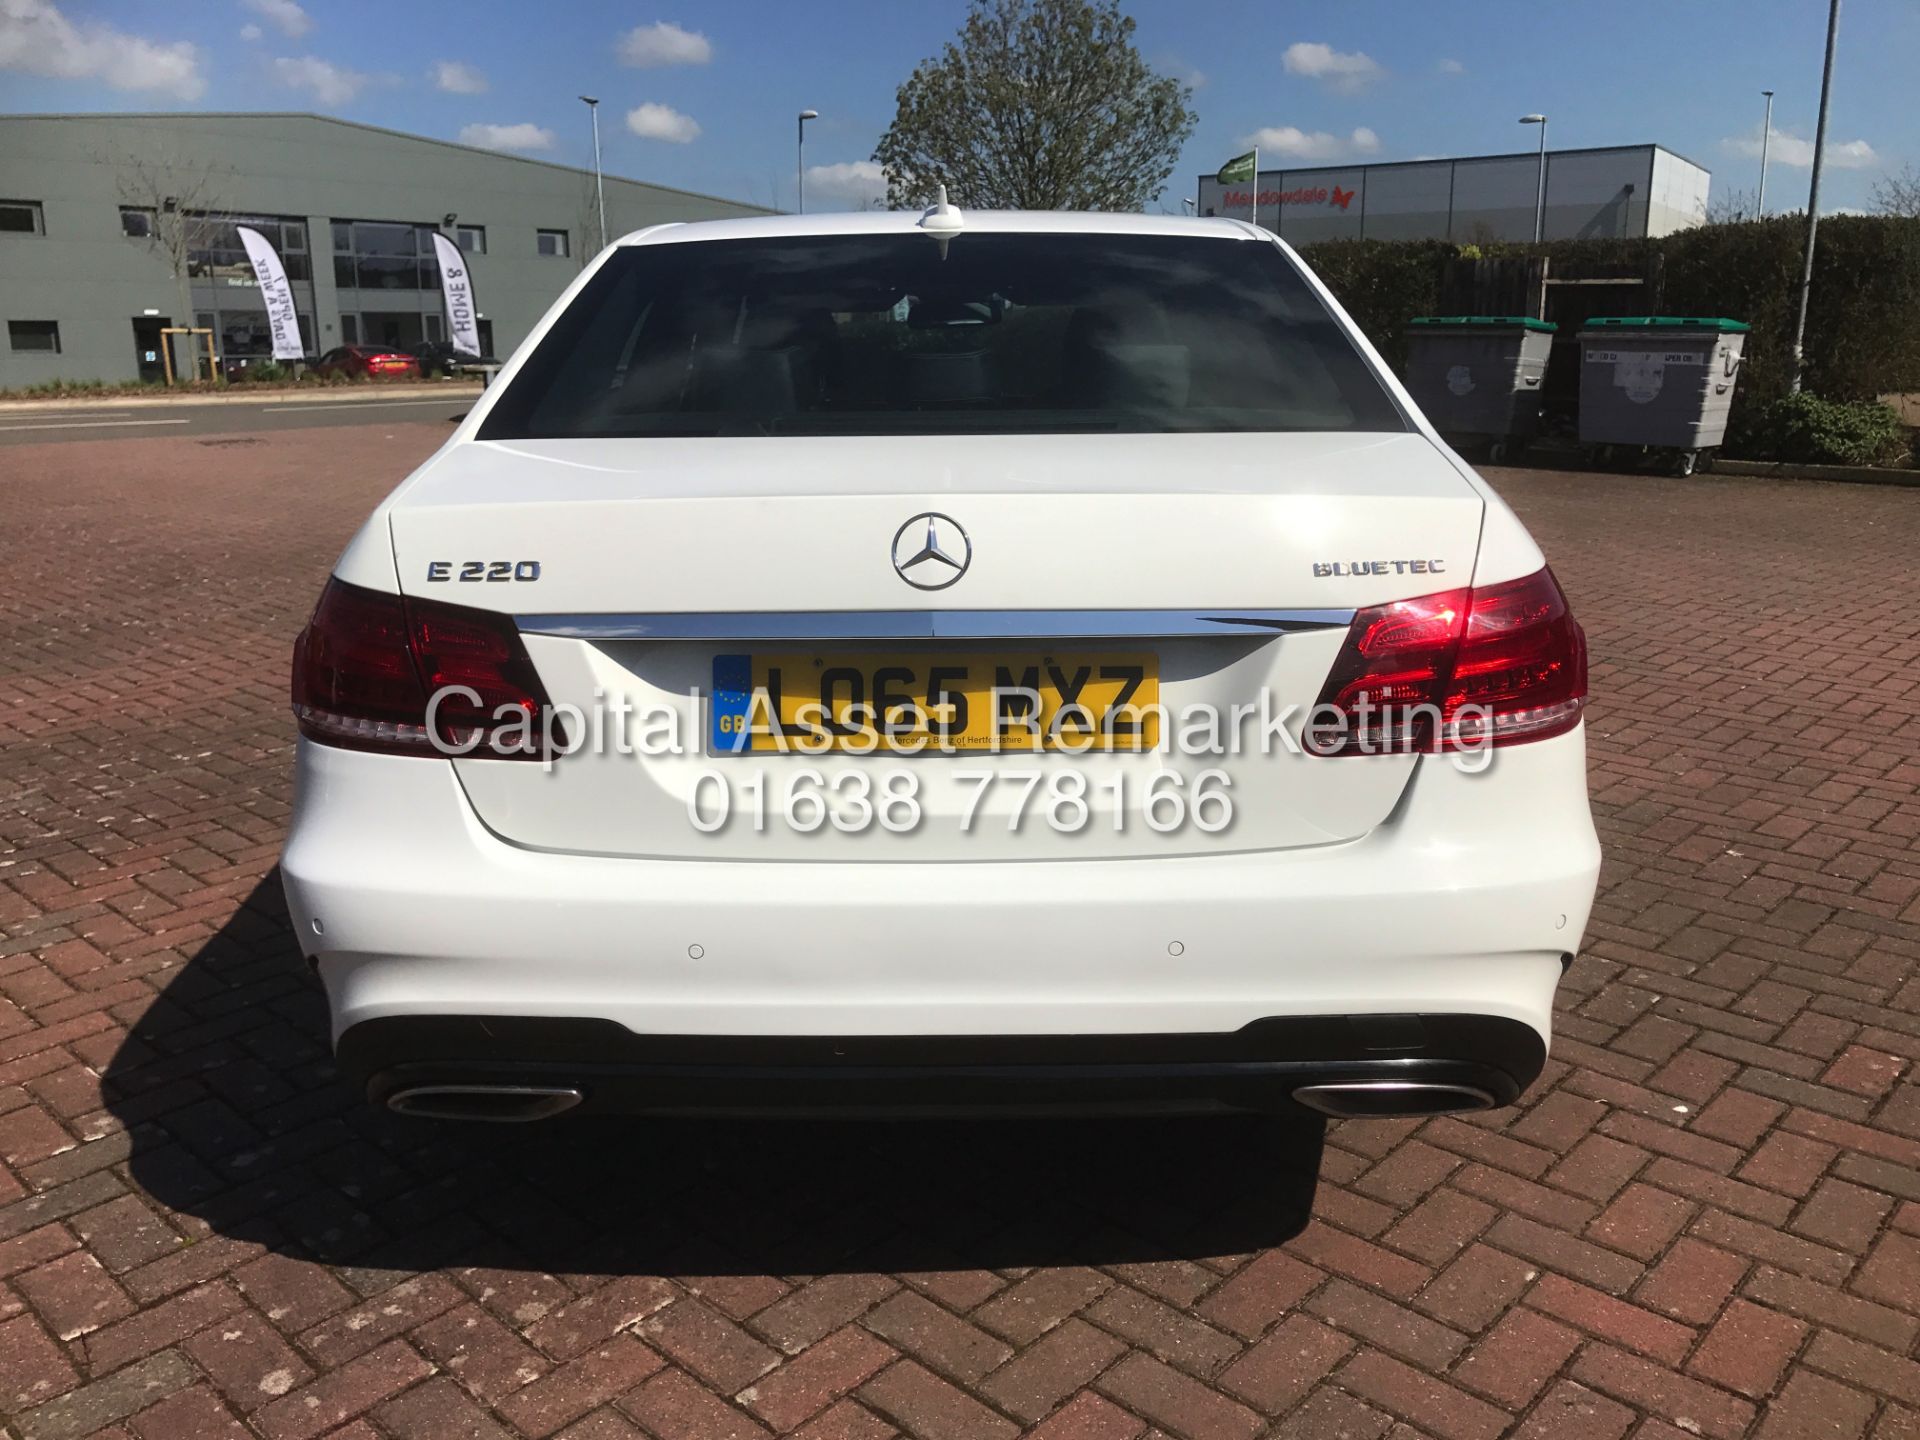 On Sale MERCEDES E220CDI "AMG NIGHT EDITION" 7G TRONIC (2016 MODEL) 1 OWNER - SAT NAV - LEATHER - Image 8 of 23